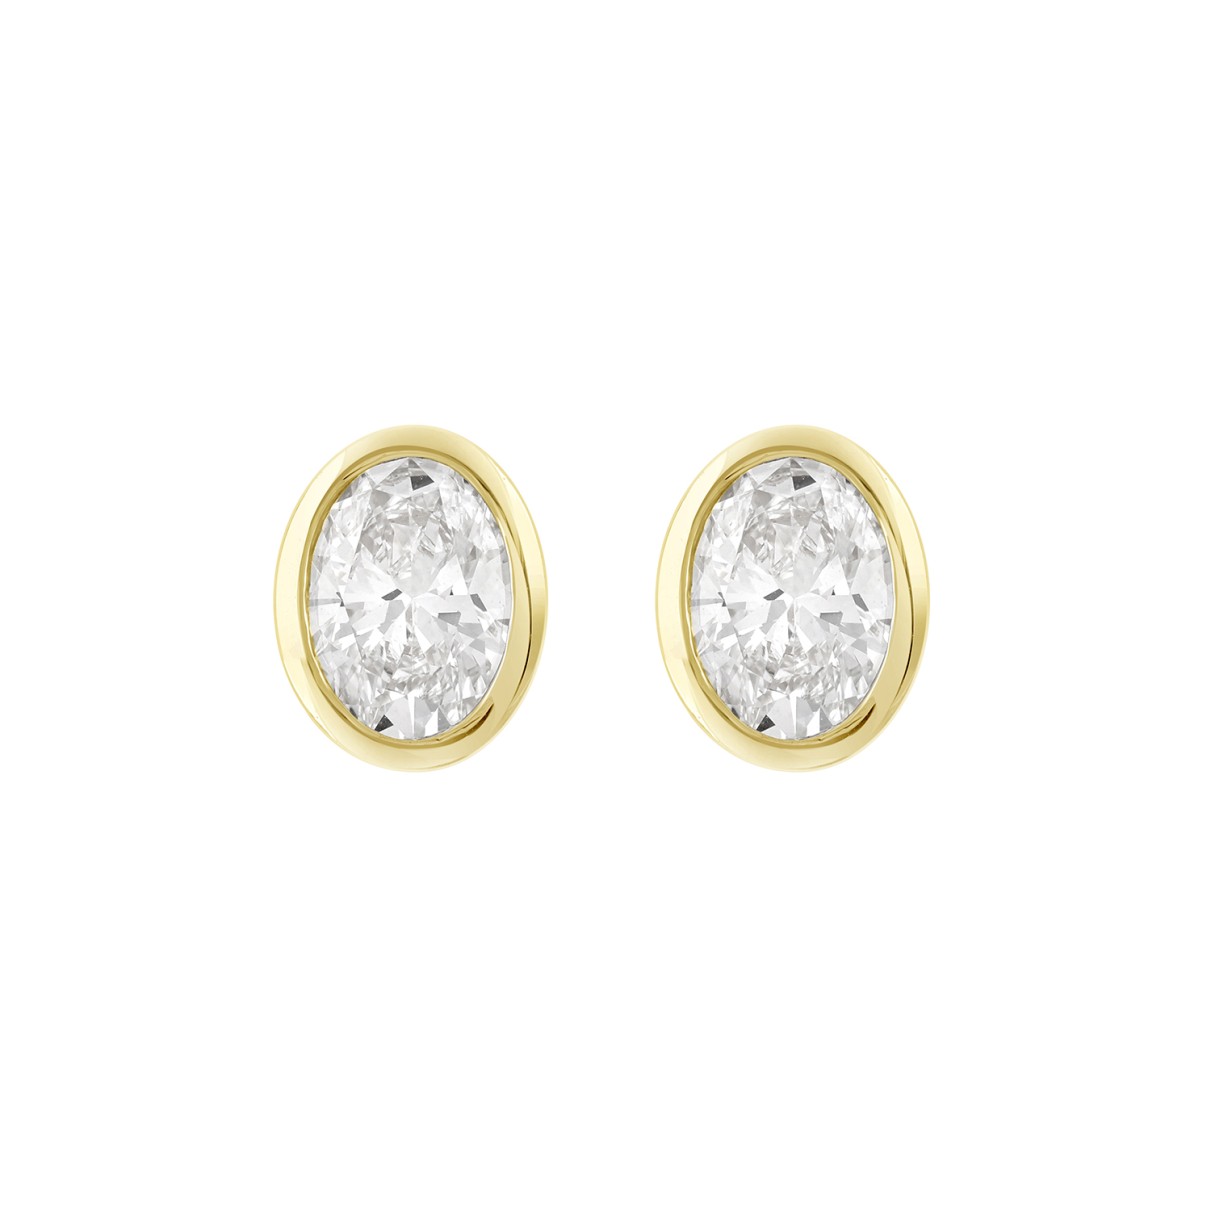 LADIES SOLITAIRE EARRING 1CT OVAL DIAMOND 14K YELL...